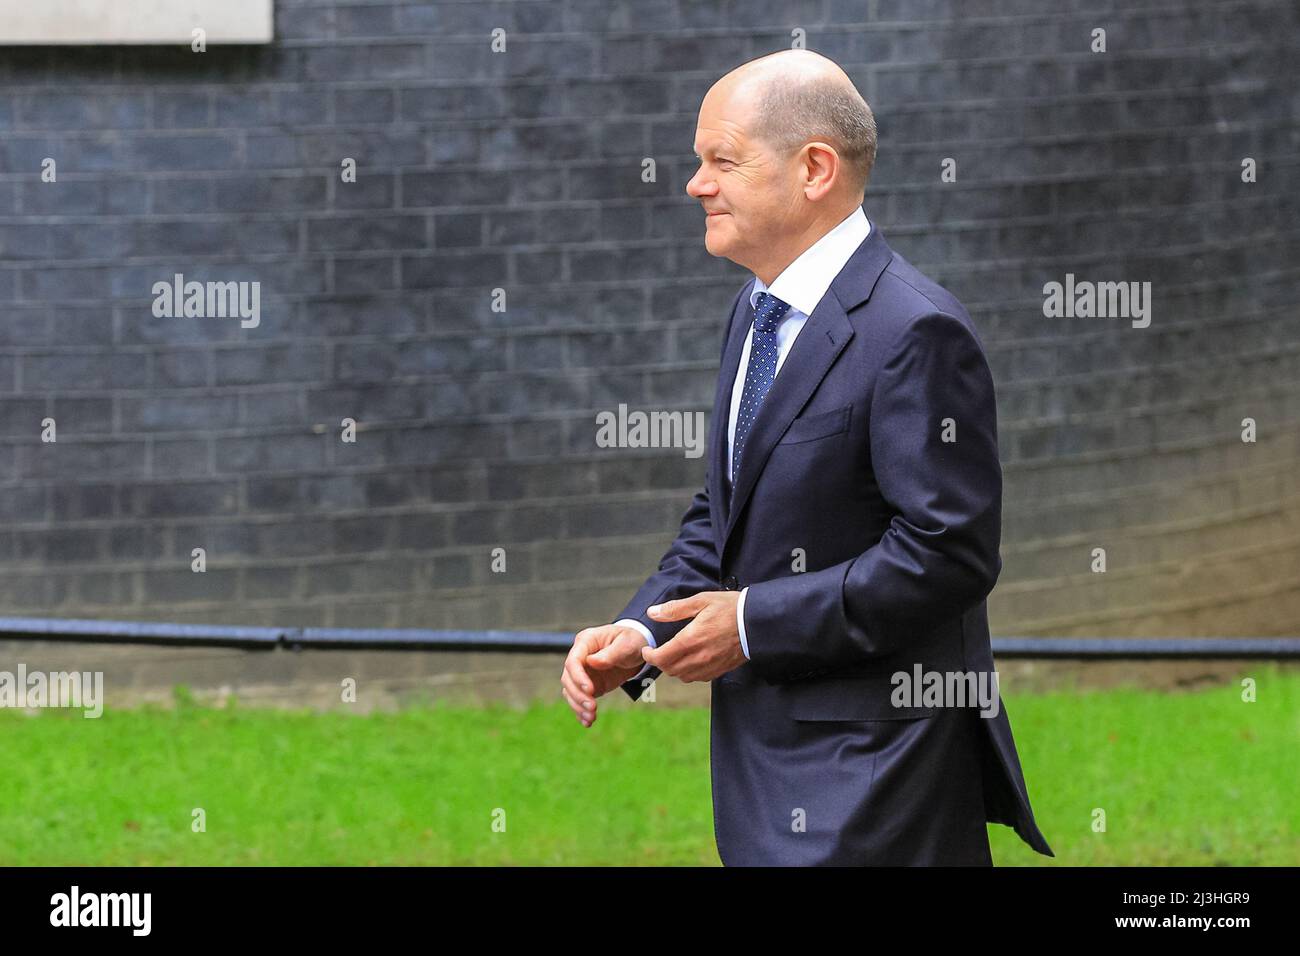 Westminster, London, UK. 08th Apr, 2022. Olaf Scholz arrives. Boris Johnson MP, British Prime Minister welcomes German Chancellor Olaf Scholz today at Downing Street for meetings to discuss the situation in Ukraine as well as international and bilateral topics. Credit: Imageplotter/Alamy Live News Stock Photo